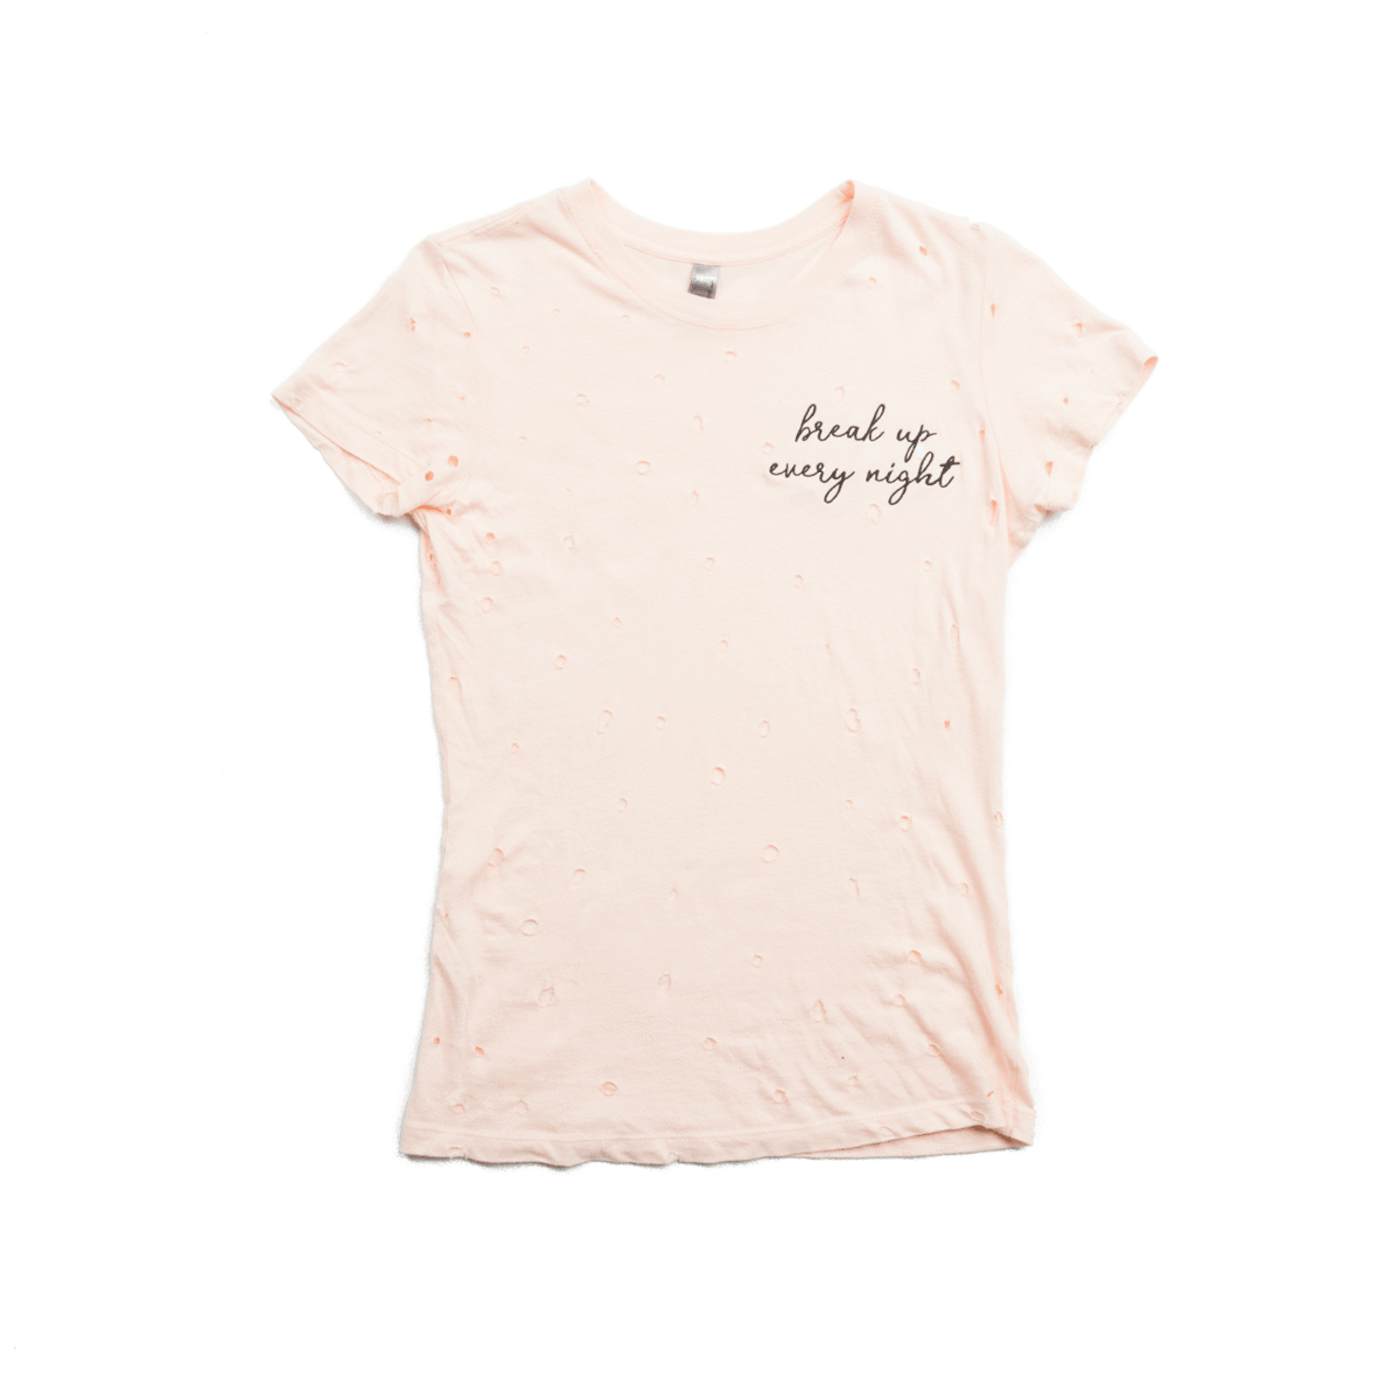 The Chainsmokers Breakup Every Night Distressed Tee